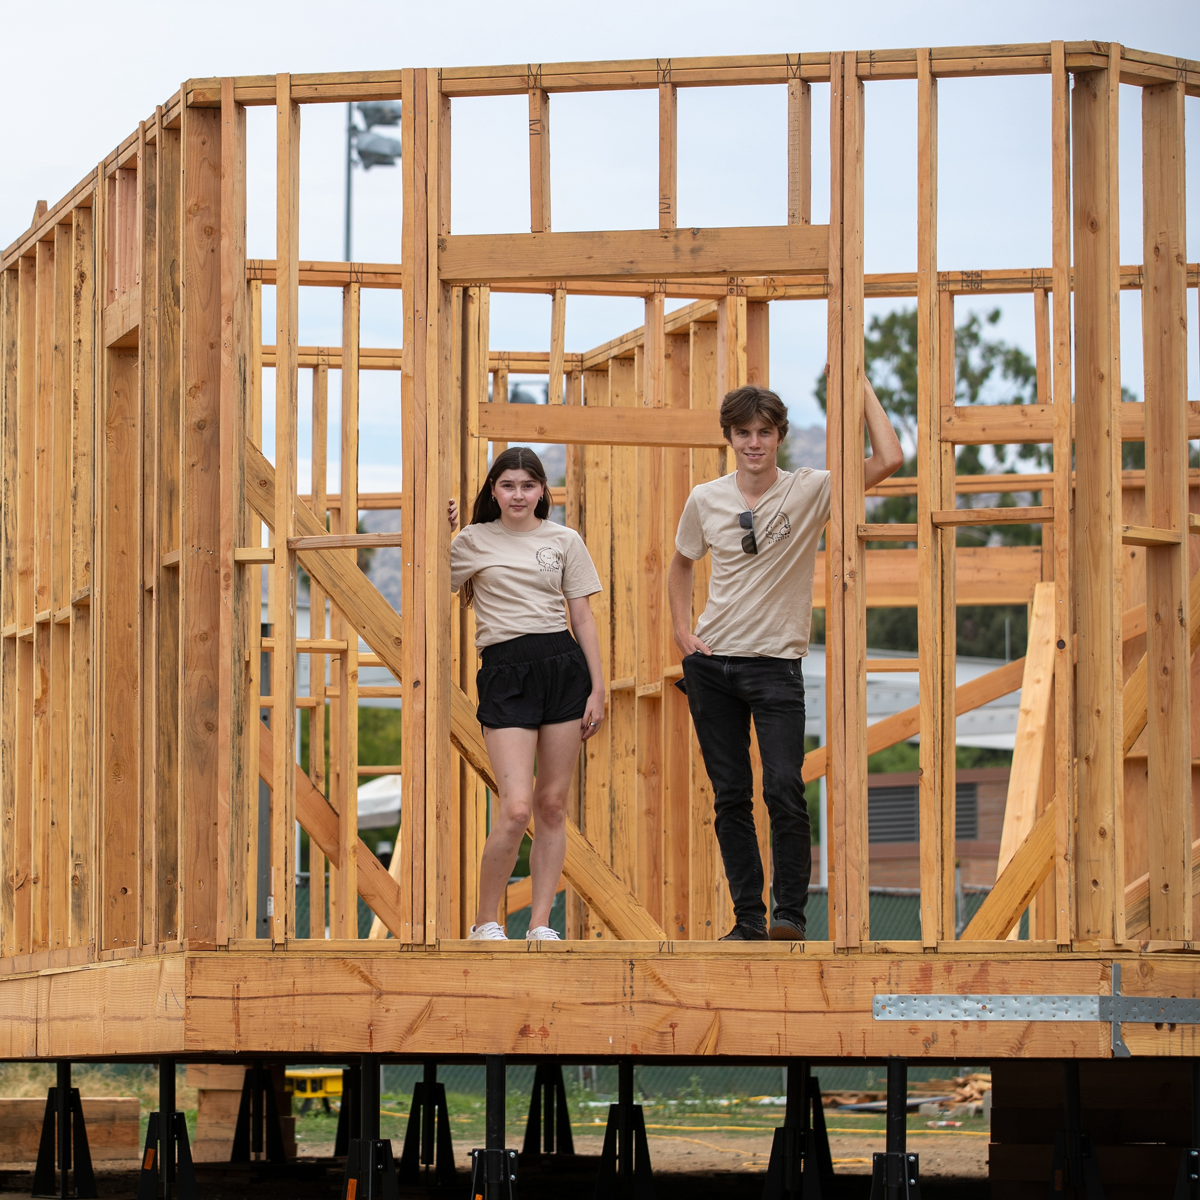 Team members Chloe Russ and Cooper Proulx stand inside the frame of the under-construction home, their team’s entry in the 2023 Orange County Sustainability Decathlon to envision the future of sustainable housing in California